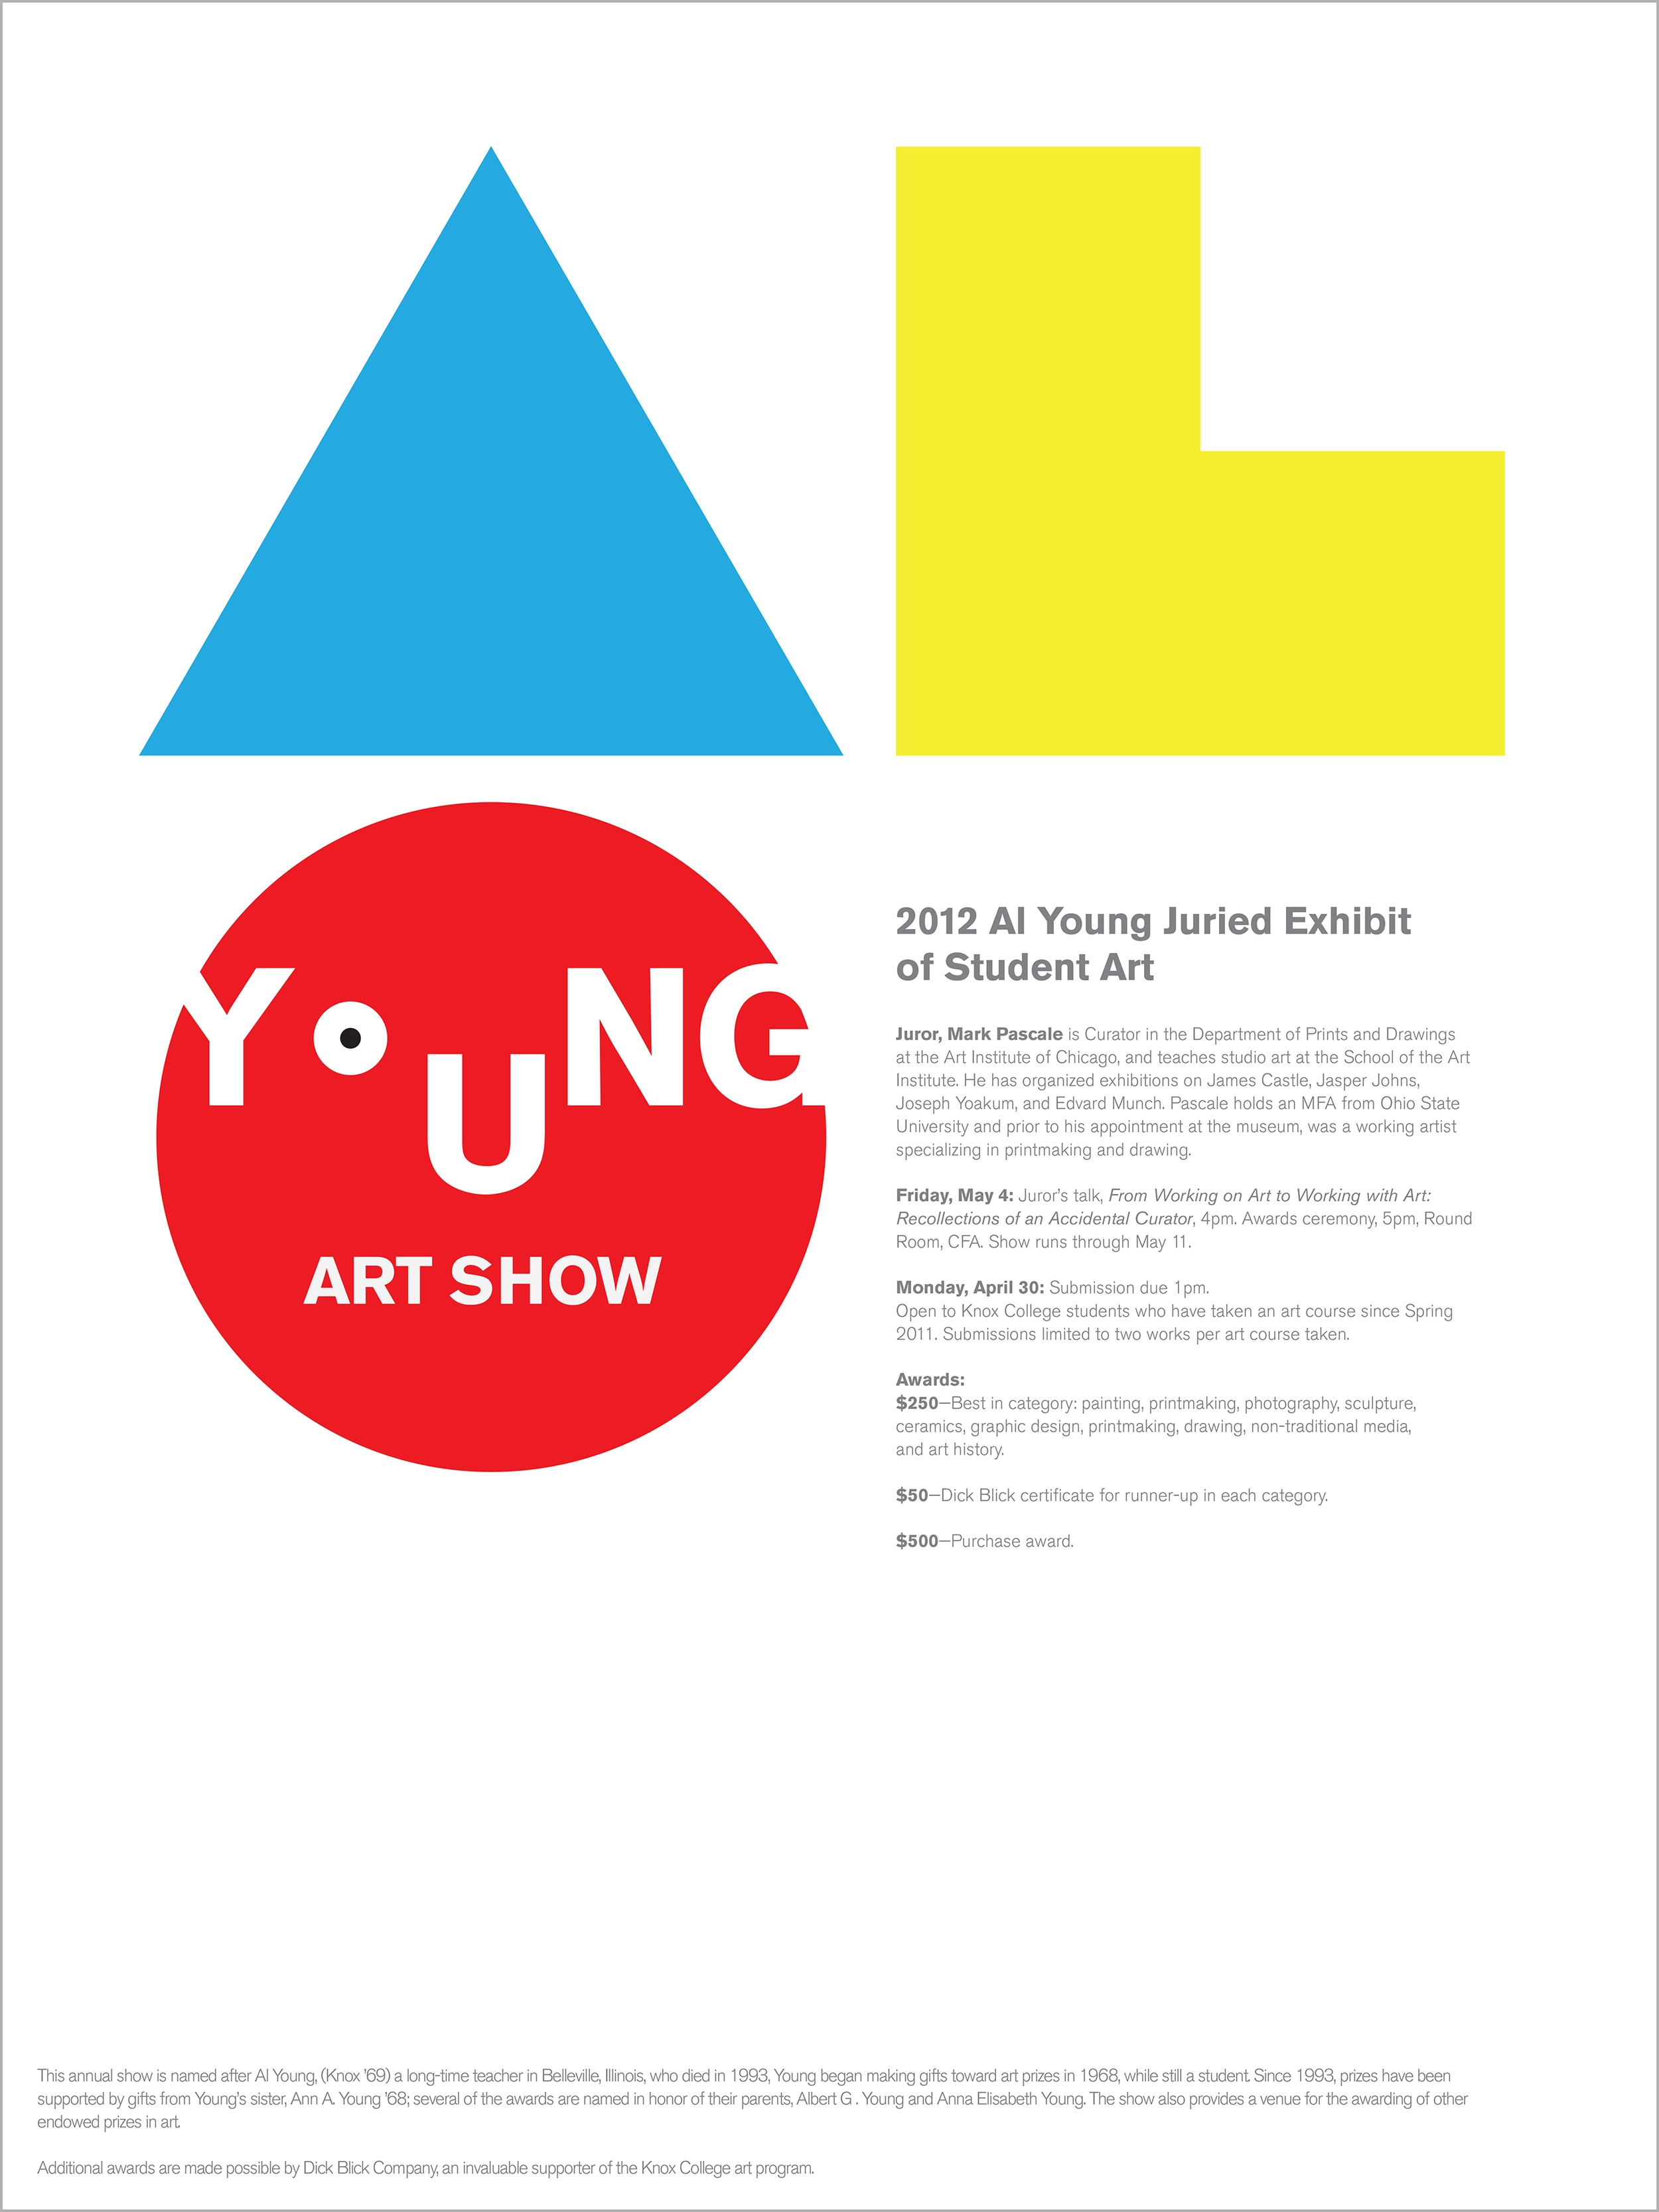 2012 Al Young Juried Exhibit of Student Art (poster)